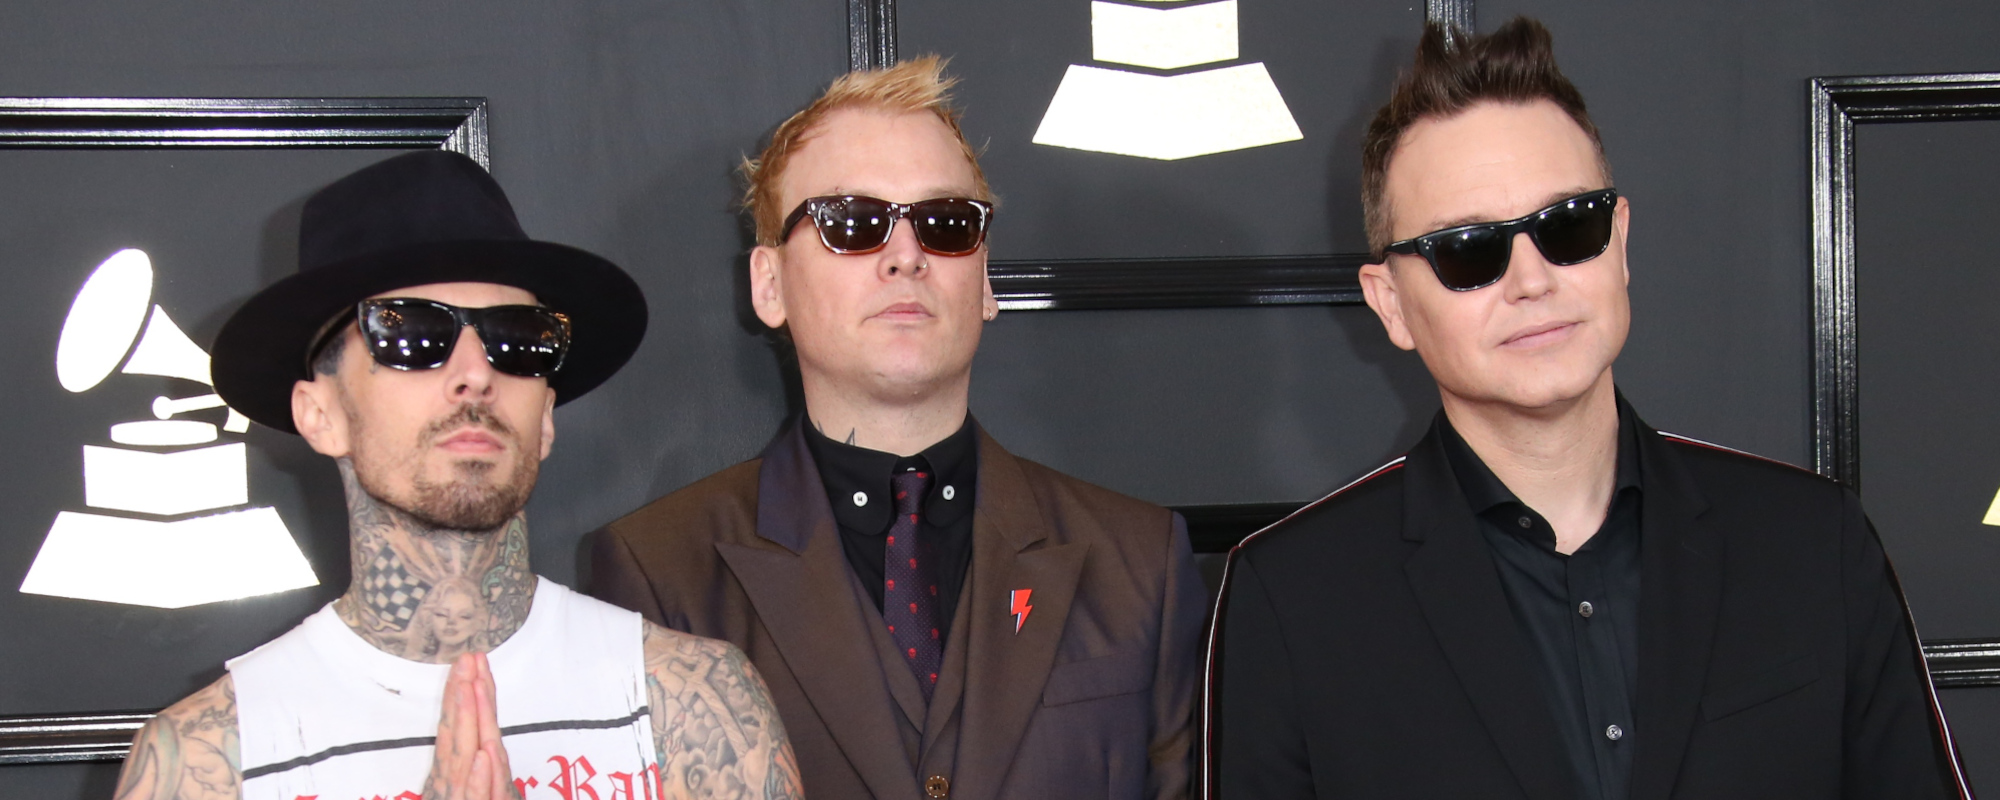 Matt Skiba Worked On “Almost a Whole Album Worth of Stuff” with Blink-182 Before Departure